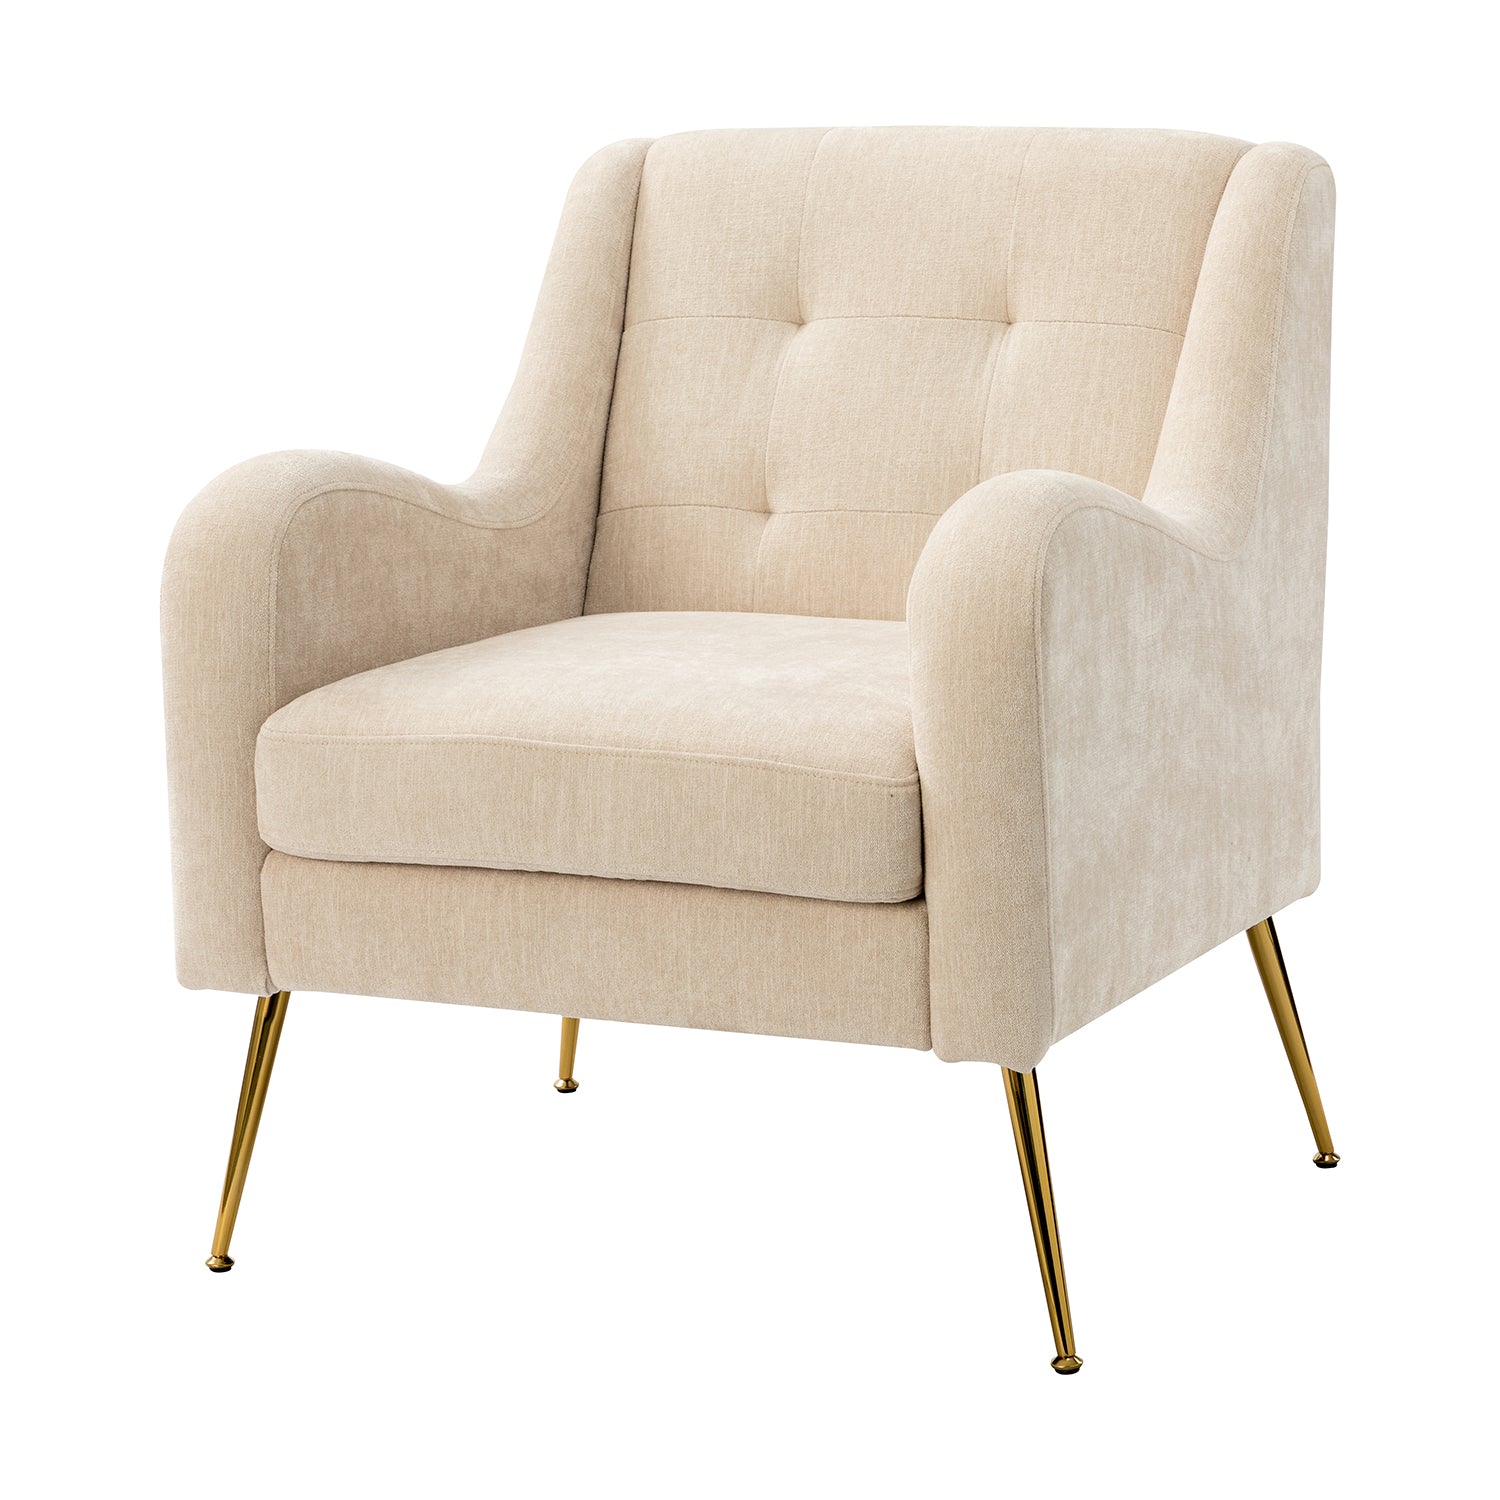 ZNTS Pyrrhus Armchair with Removable Cushions W113753099